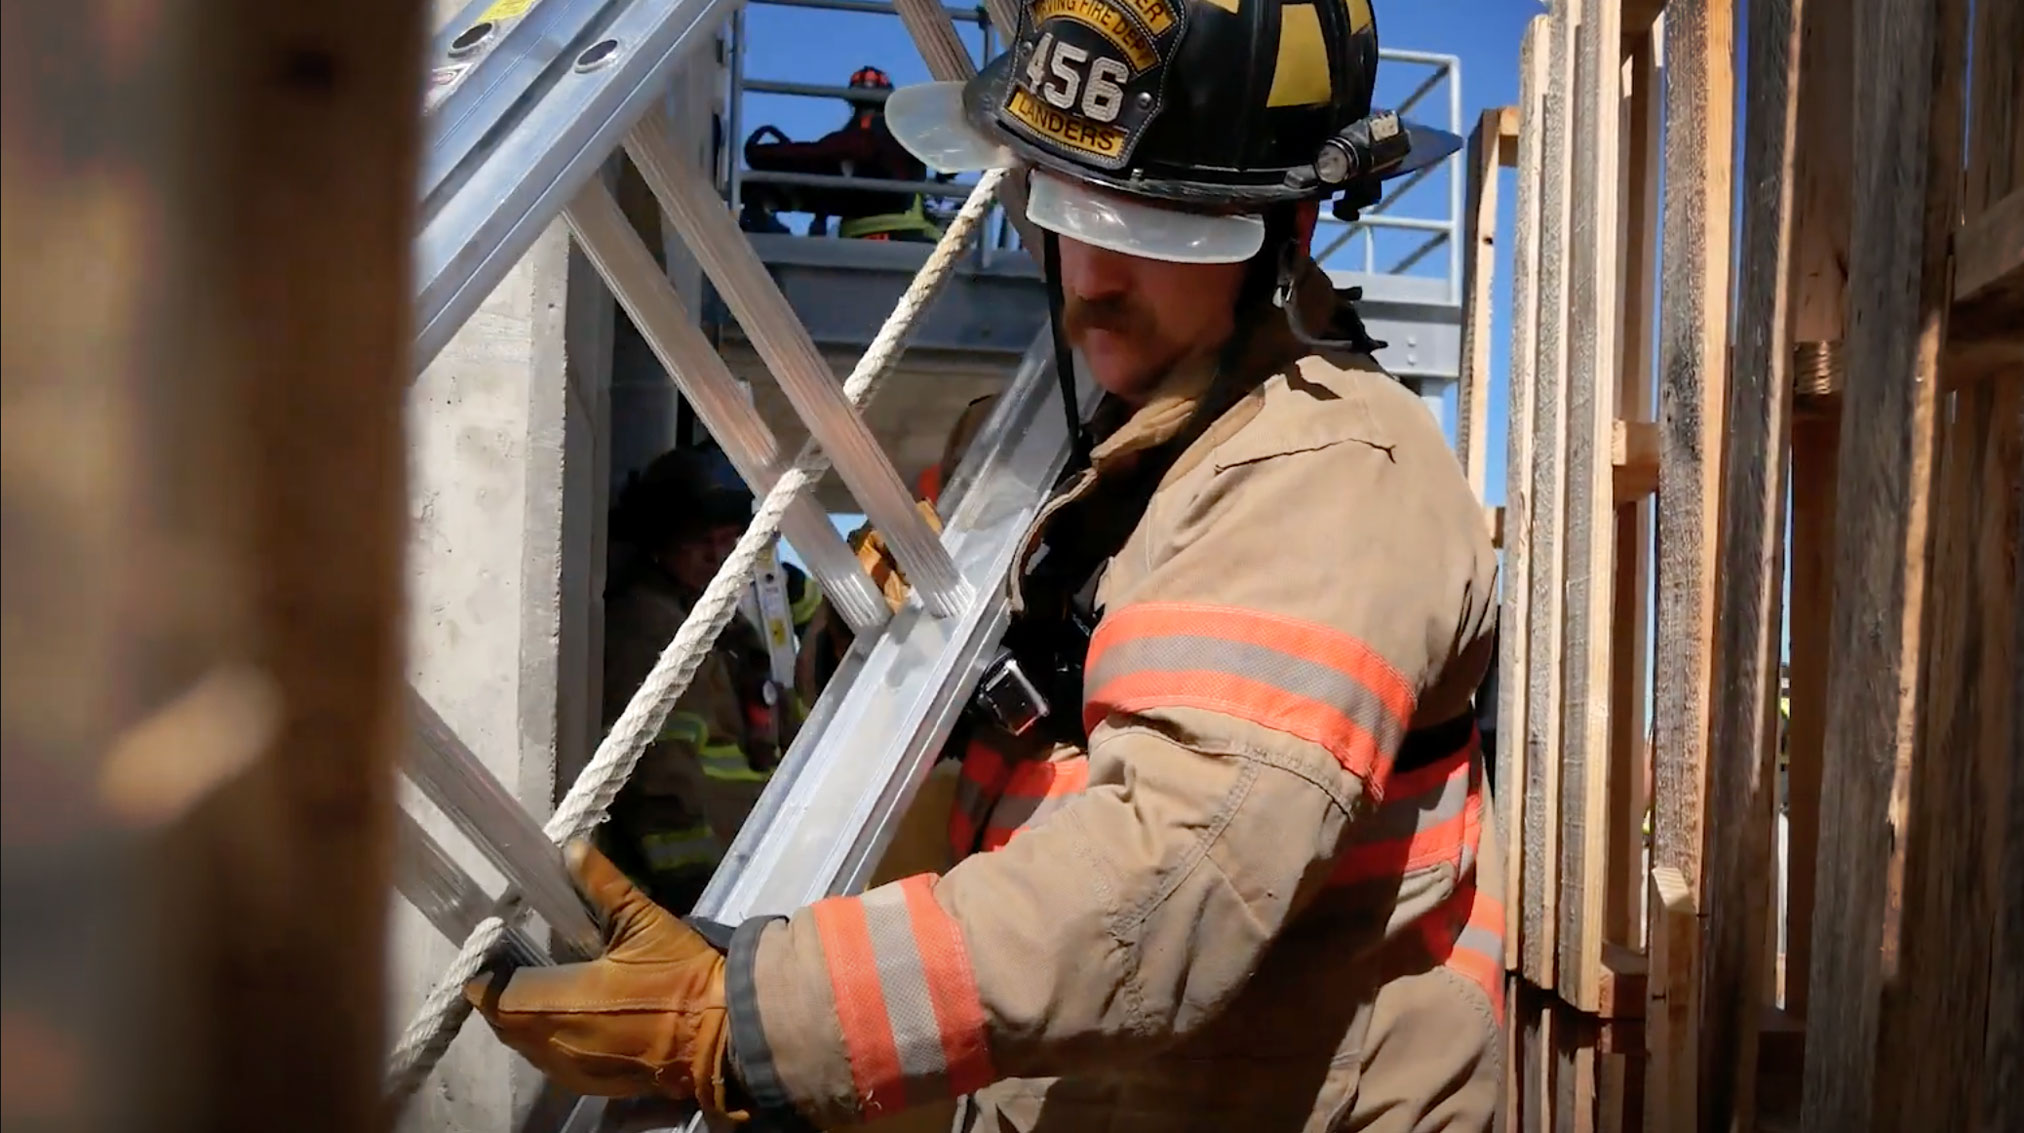 Featured image for “Single Person Alley Toss | Firefighter Ground Ladder Training”